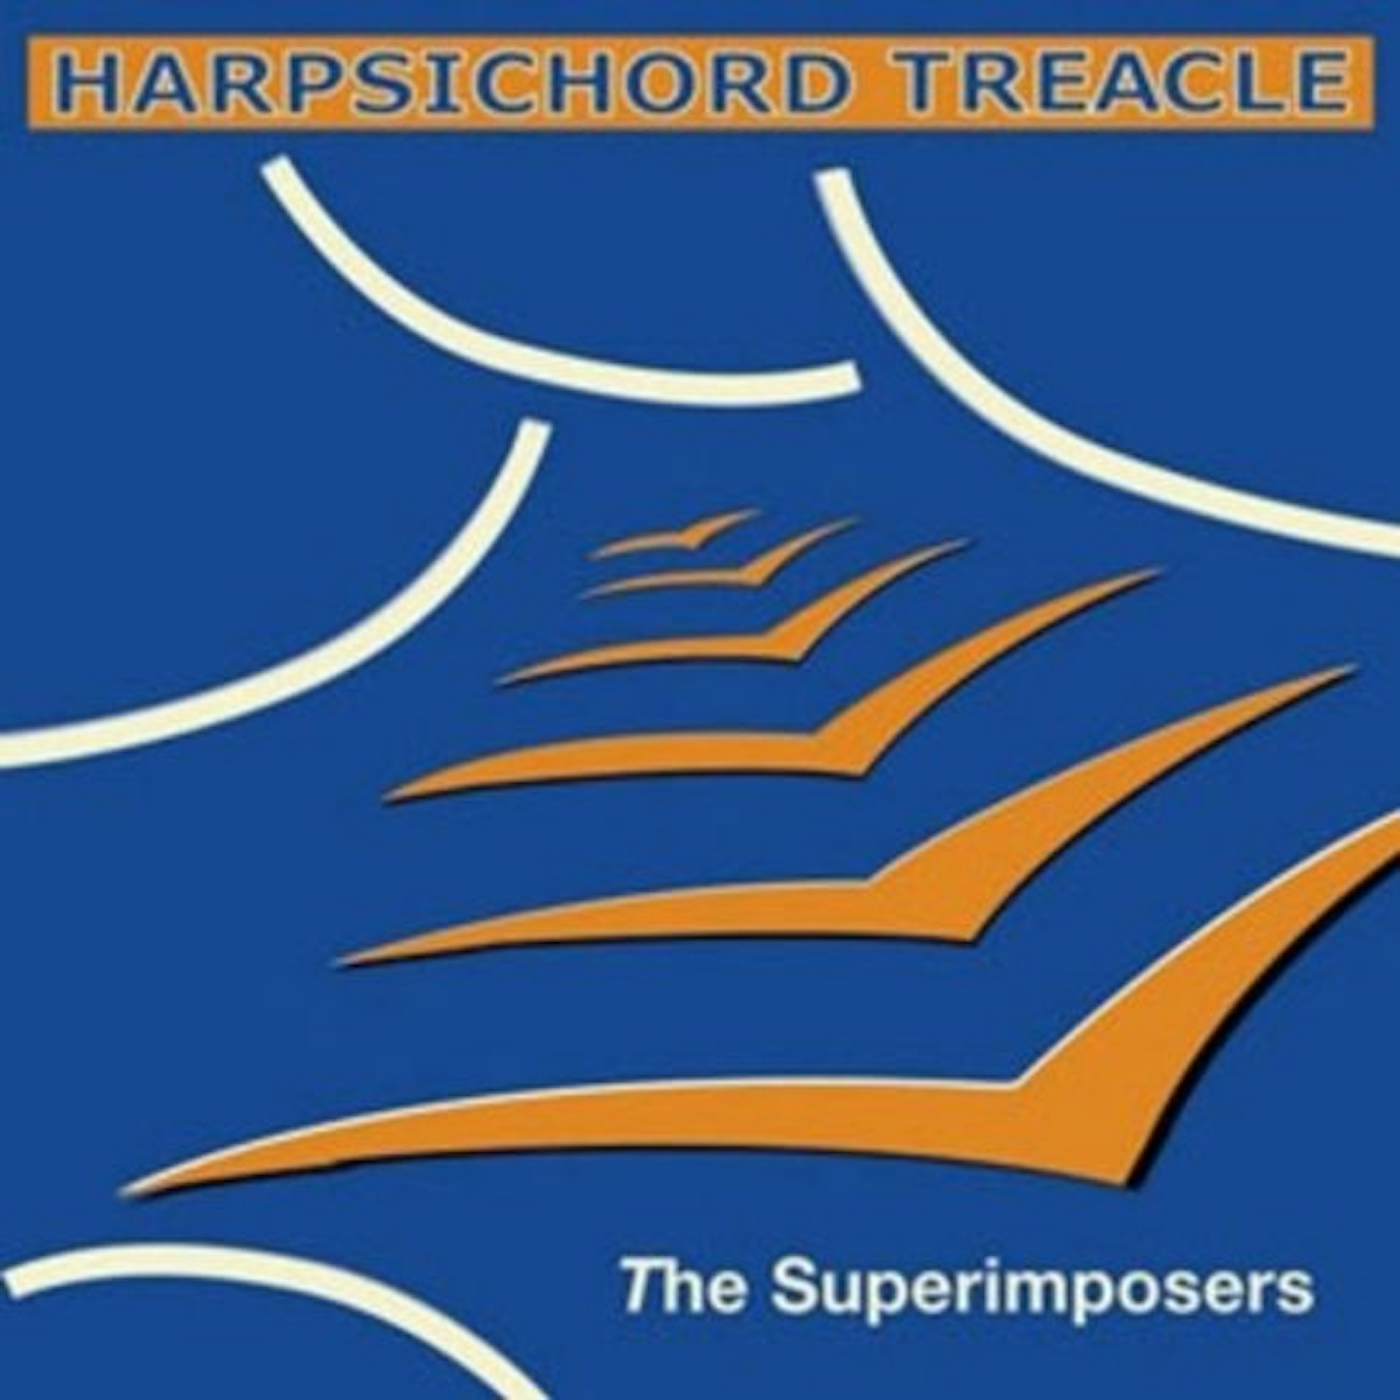 The Superimposers HARPSICHORD TREACLE CD